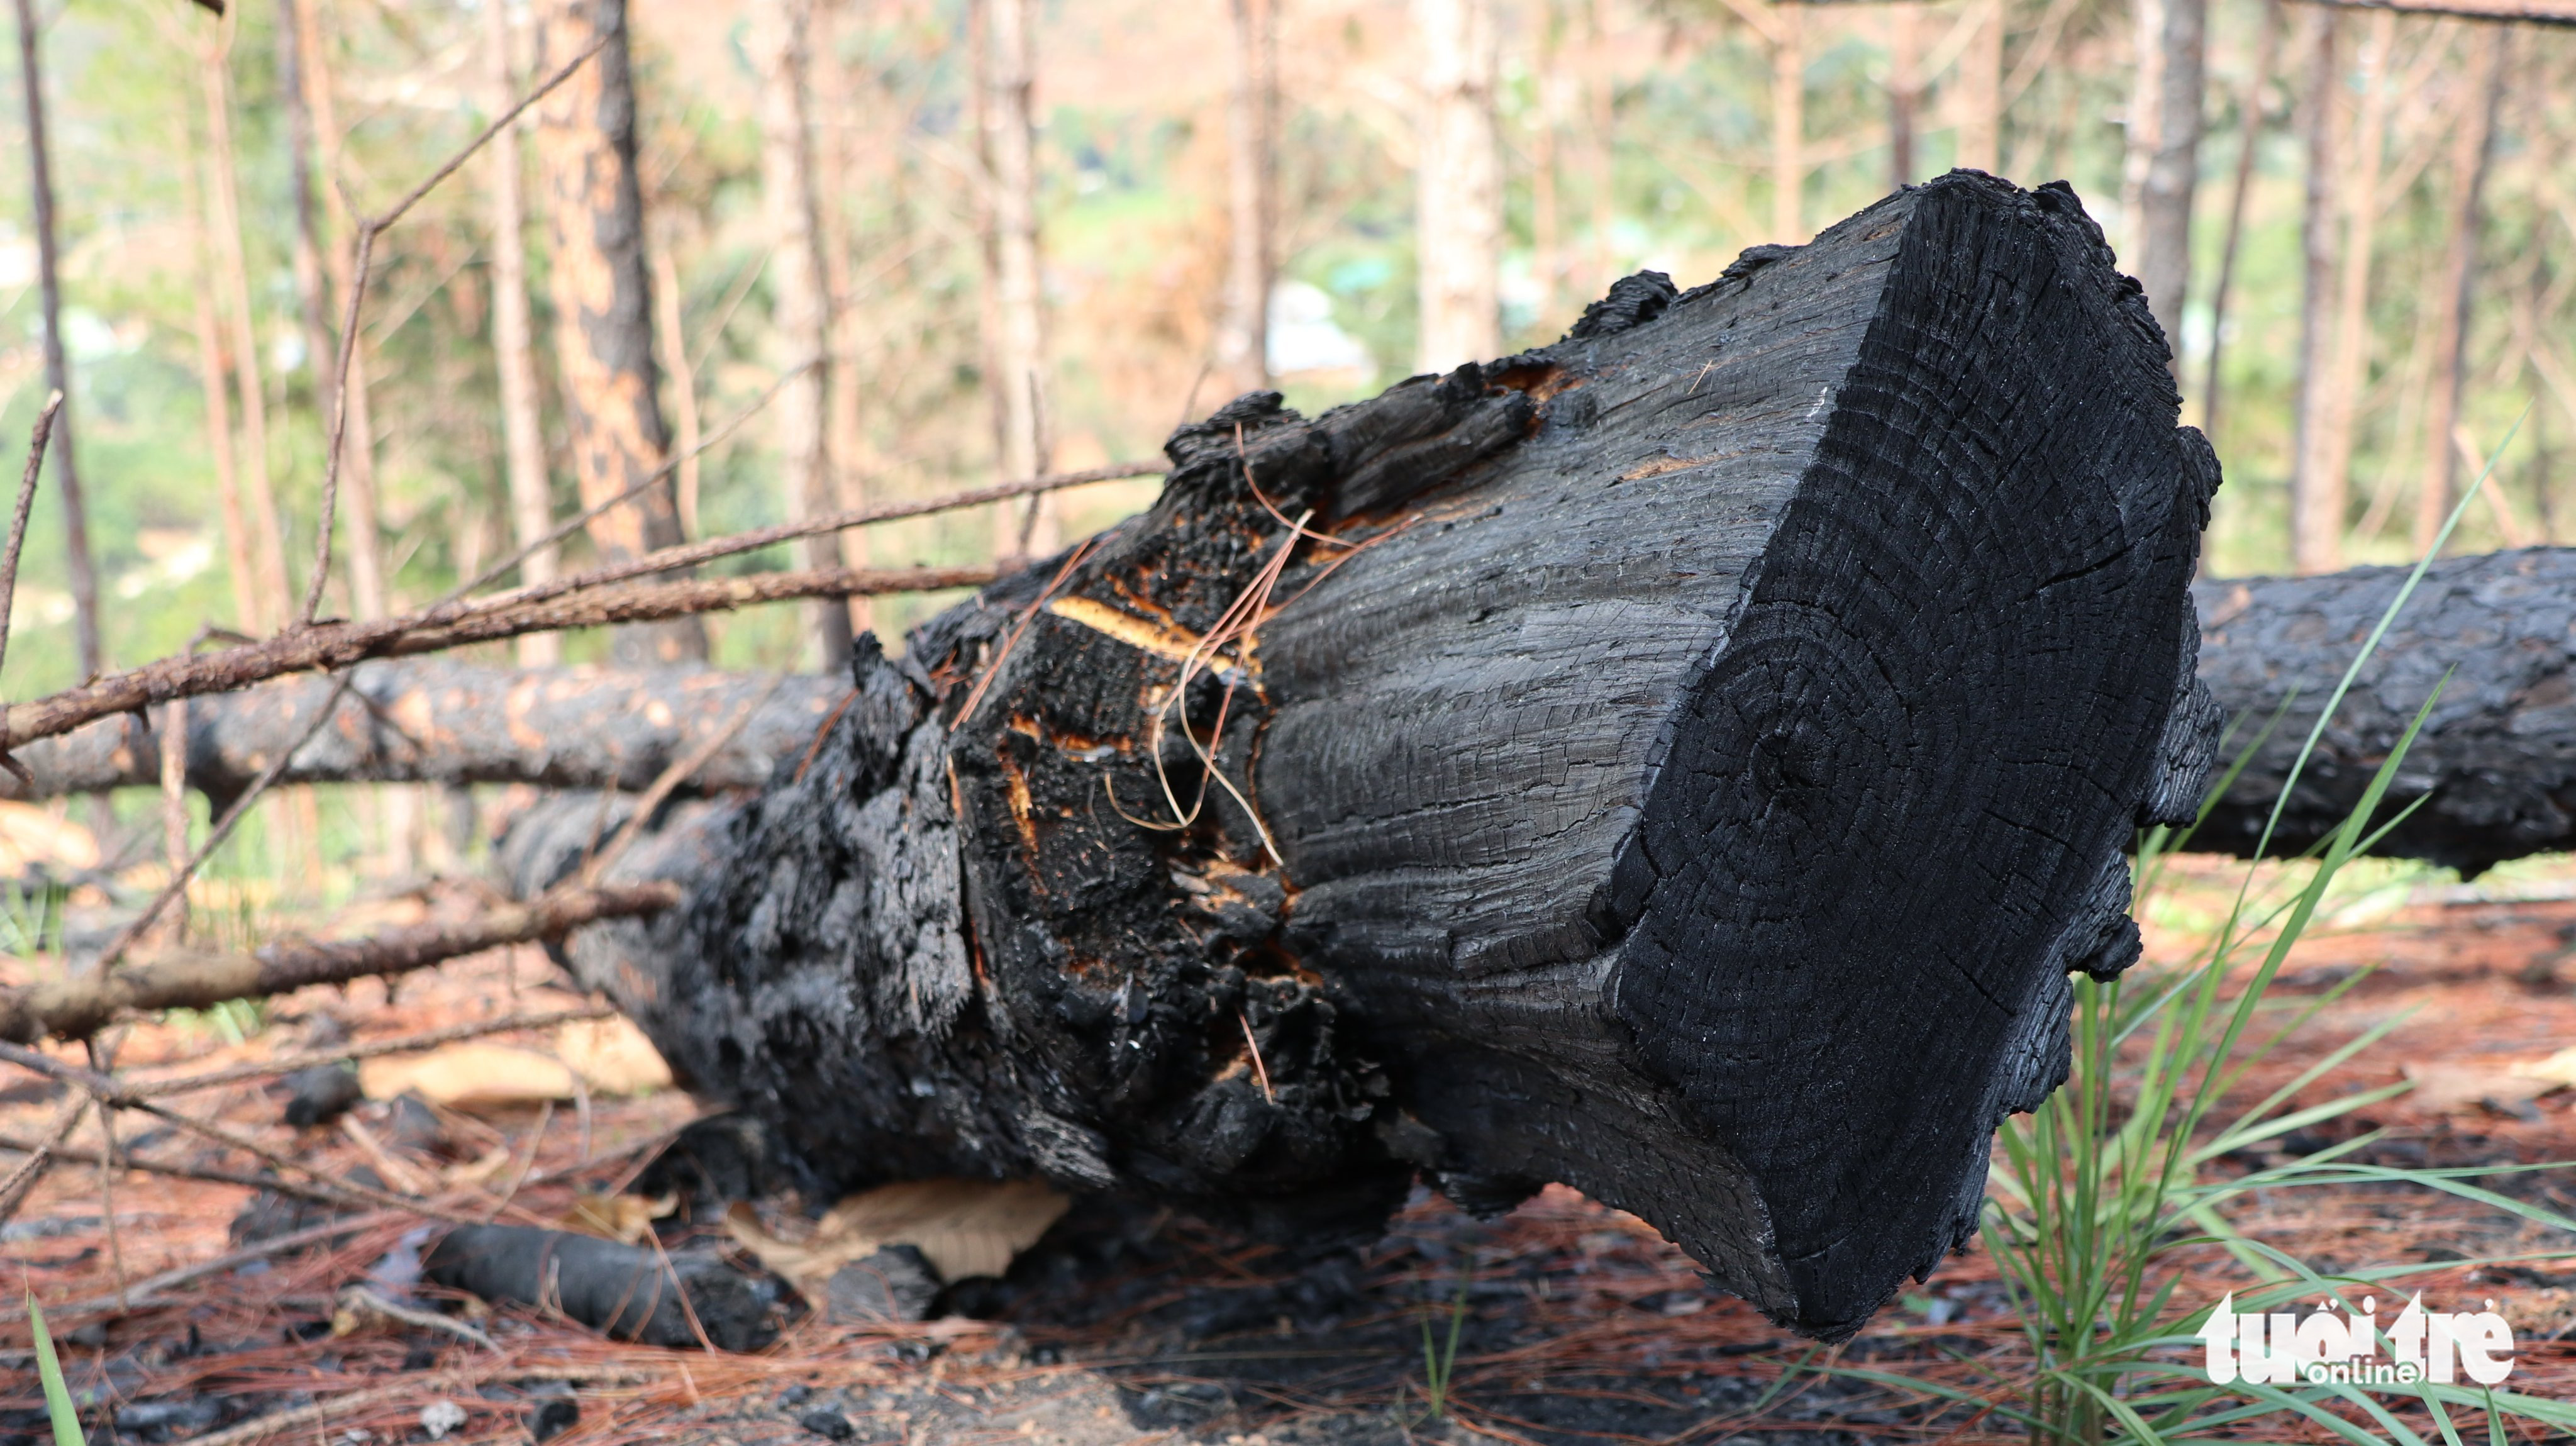 Pine trees burned after being felled at forest in Vietnam’s Central Highlands